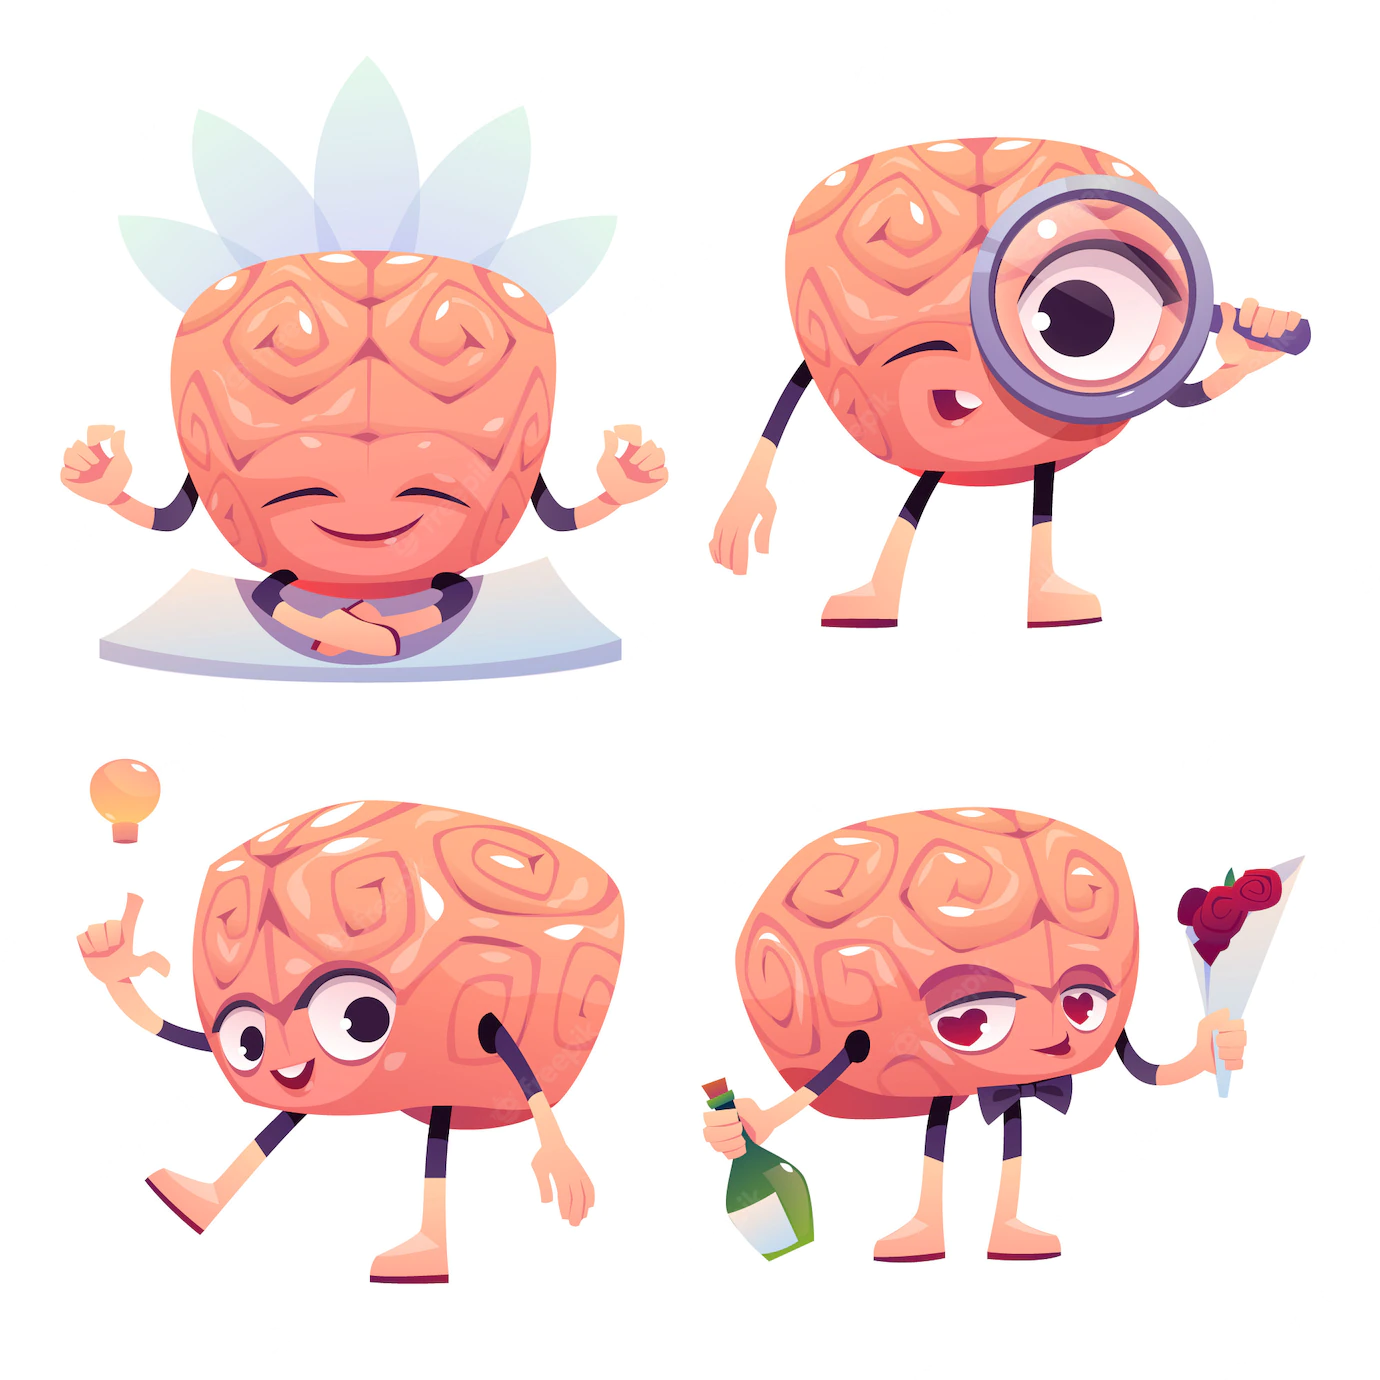 Brain Characters Cartoon Mascot With Funny Face 107791 2302